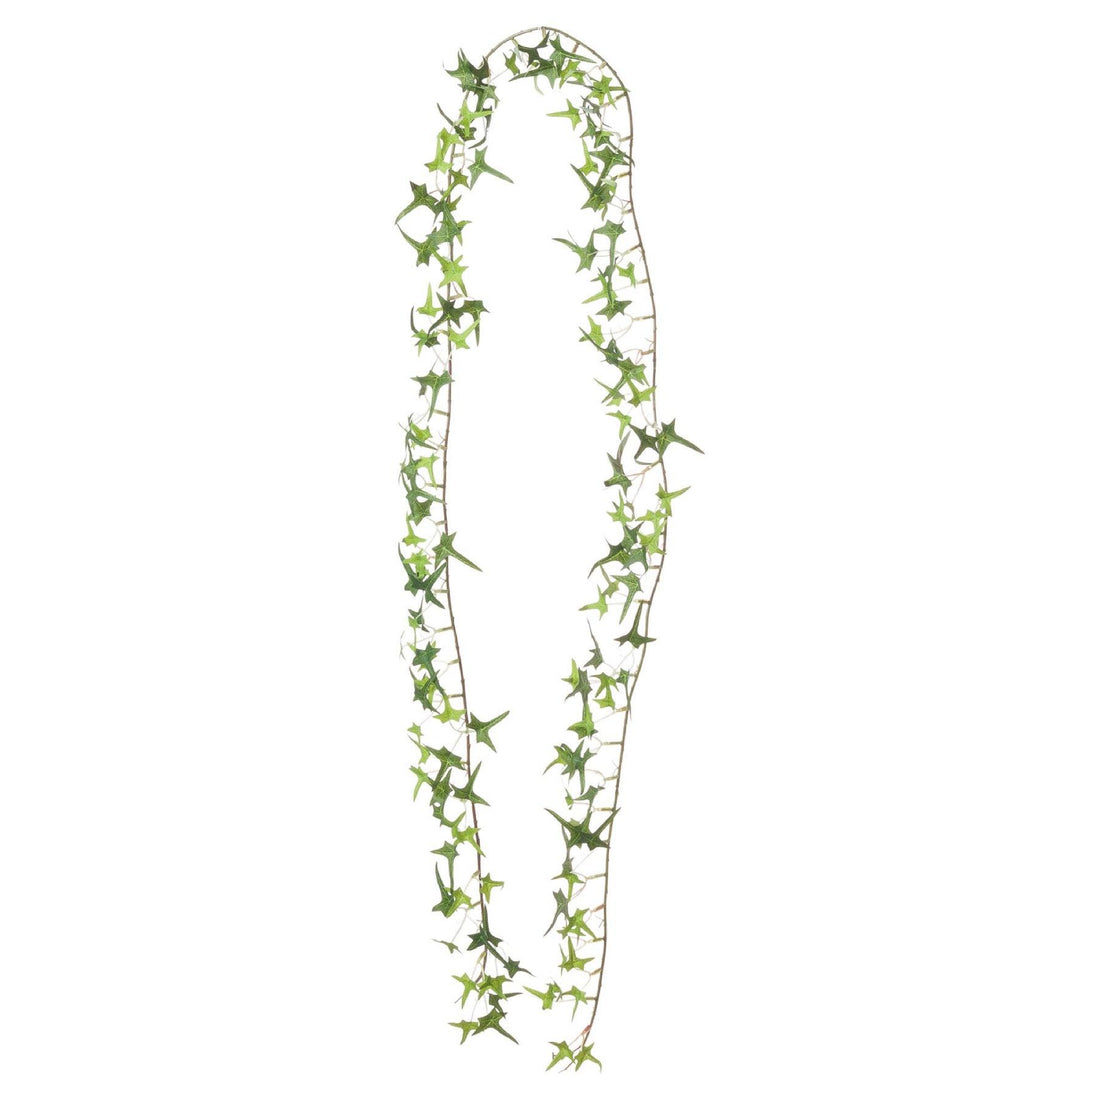 Small Ivy Garland - £19.95 - Gifts & Accessories > Christmas Decorations > Christmas Wreaths & Garlands 